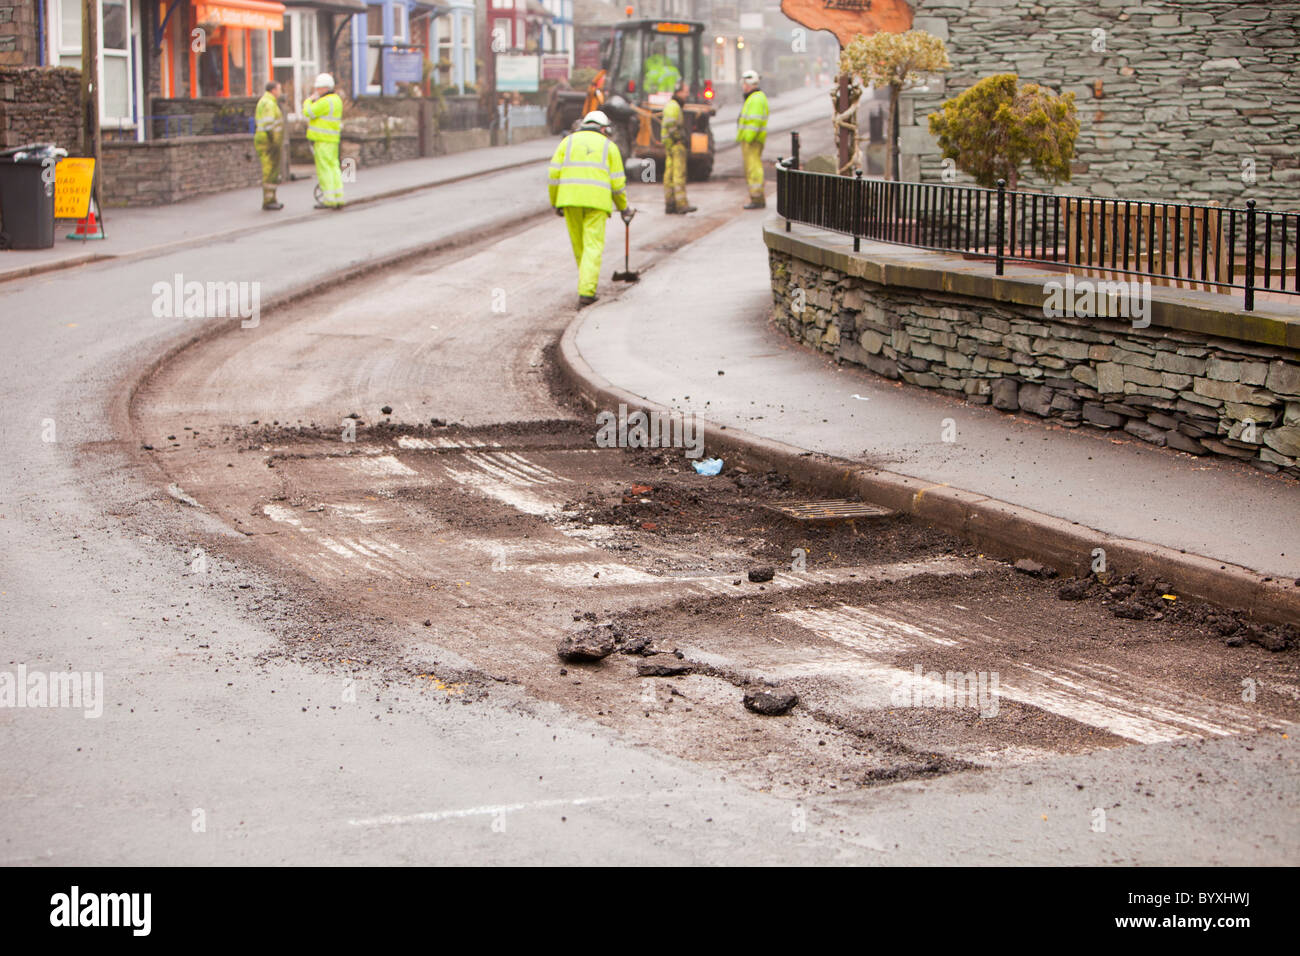 Resurfacing work taking place in Ambleside after floods and harsh winter weather caused serious erosion of the road surface. Stock Photo